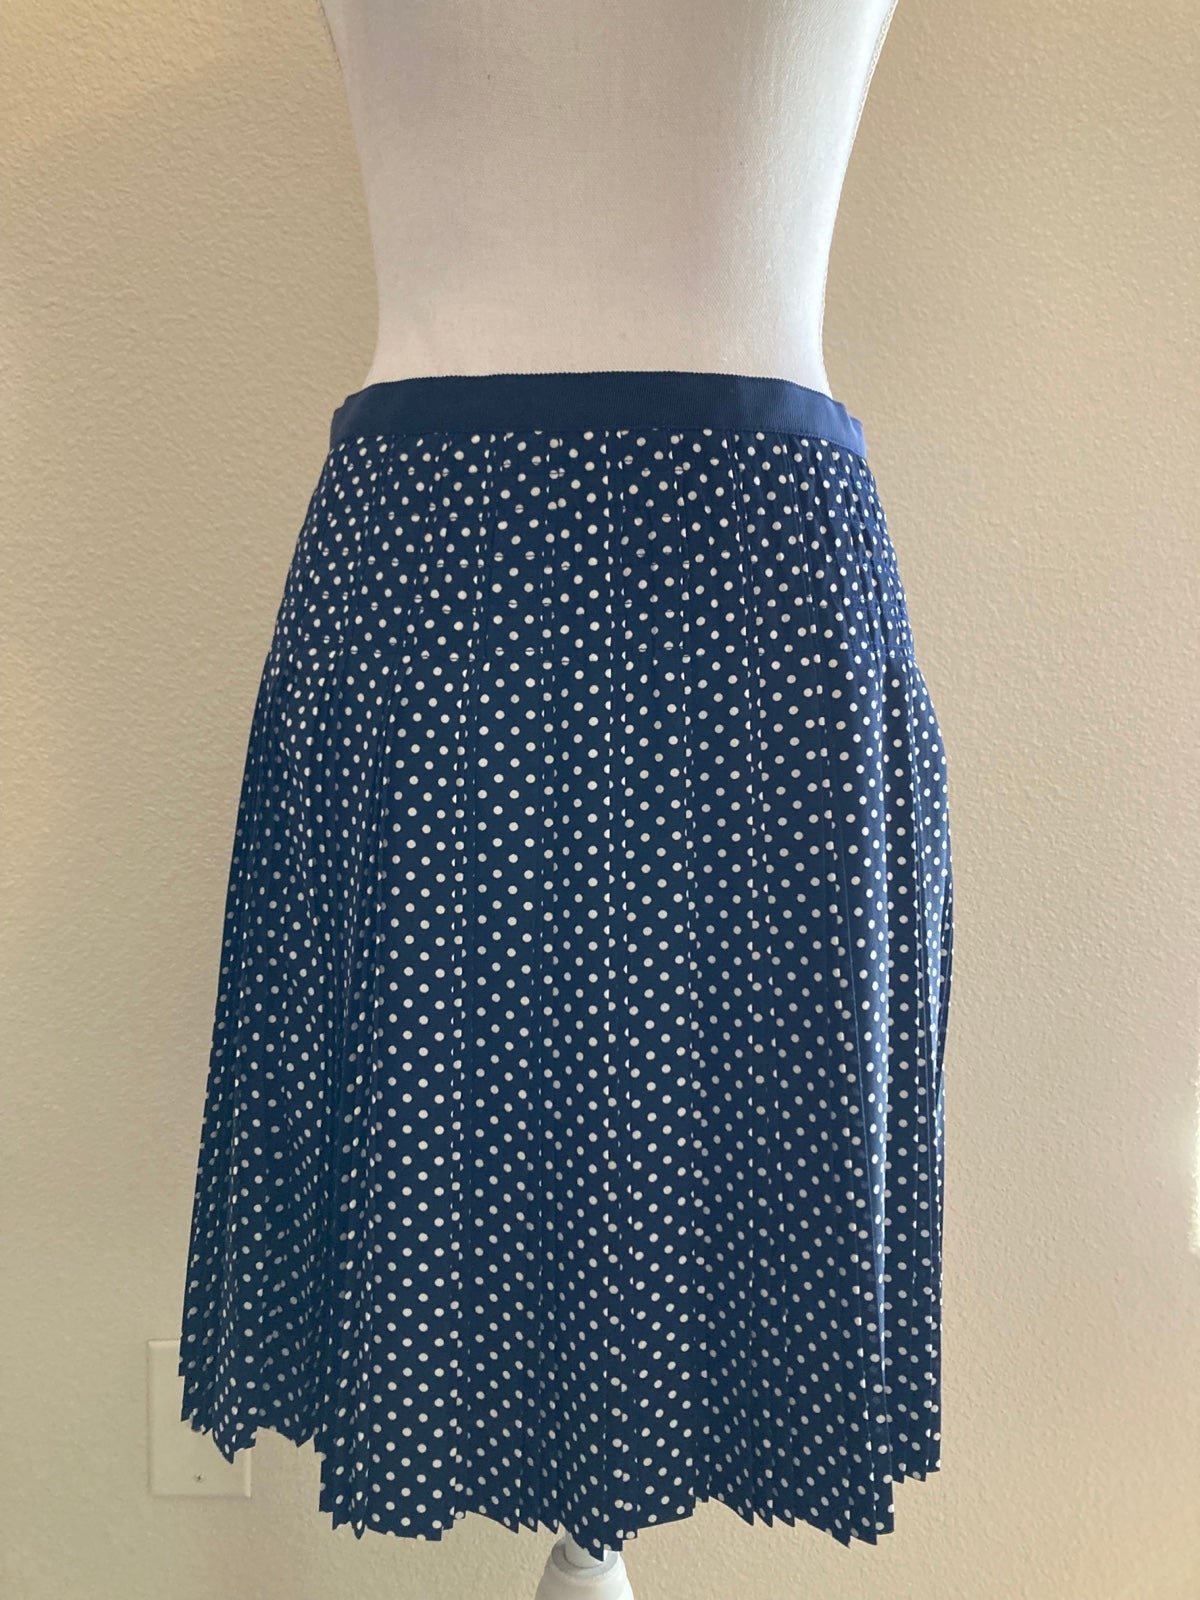 Exclusive J Crew Navy Blue White Polka Dot Stitched Dow